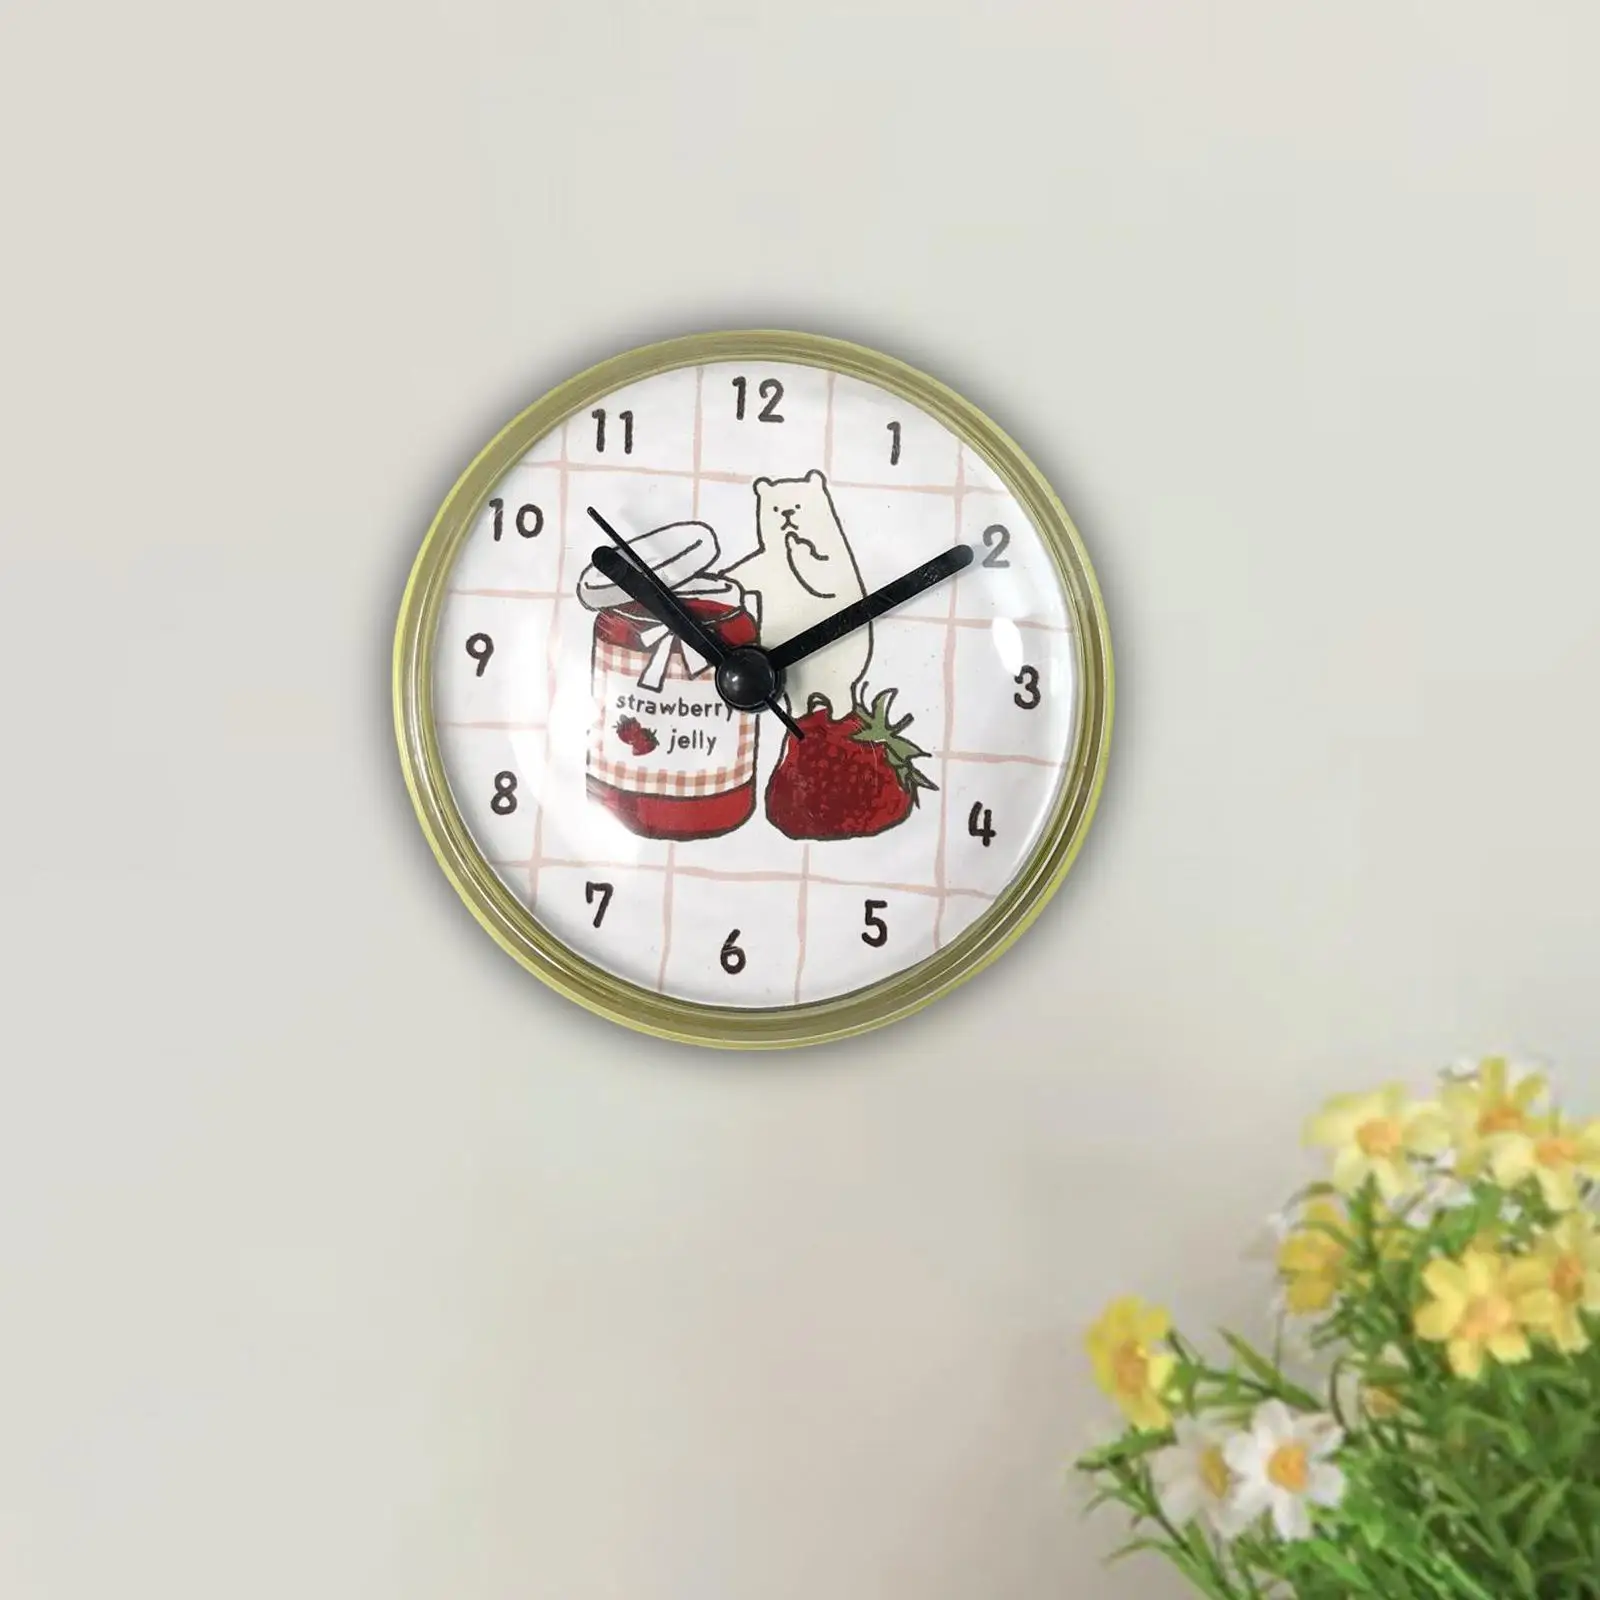 7cm Kitchen Toilet Small Table Clock,Mini Wall Clock for Shower